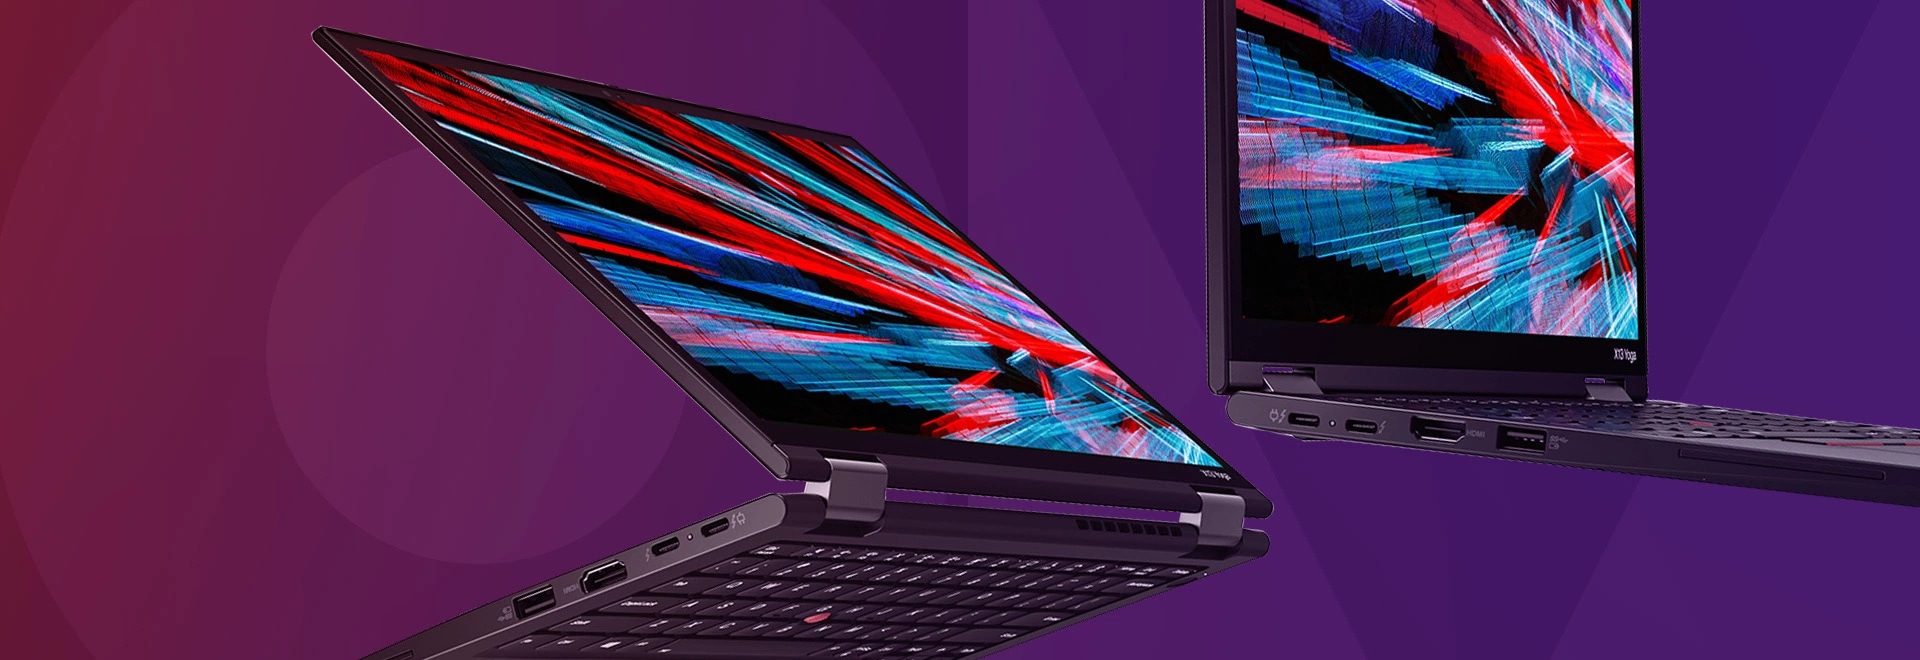 A Lenovo ThinkPad X Series in a clamshell and traditional modes.